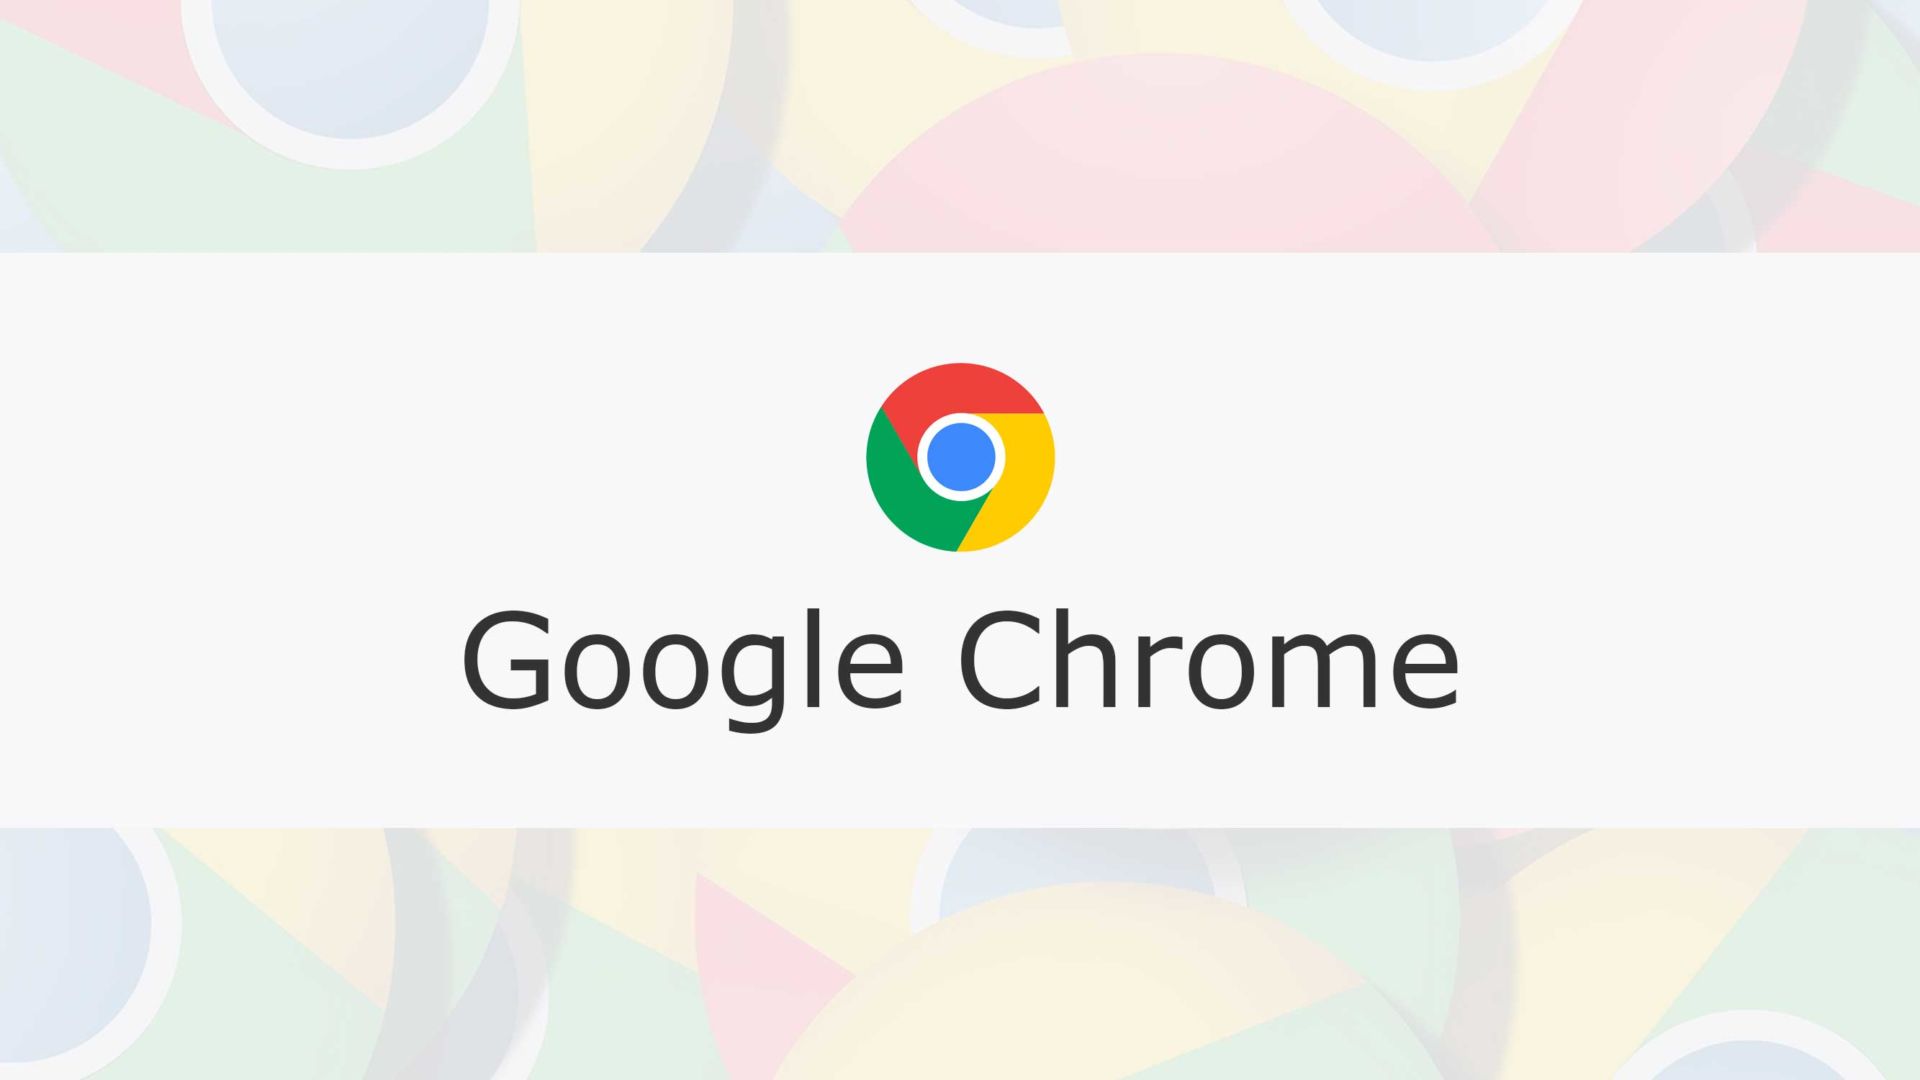 Google's Chrome Browser Can Now Translate And Speak